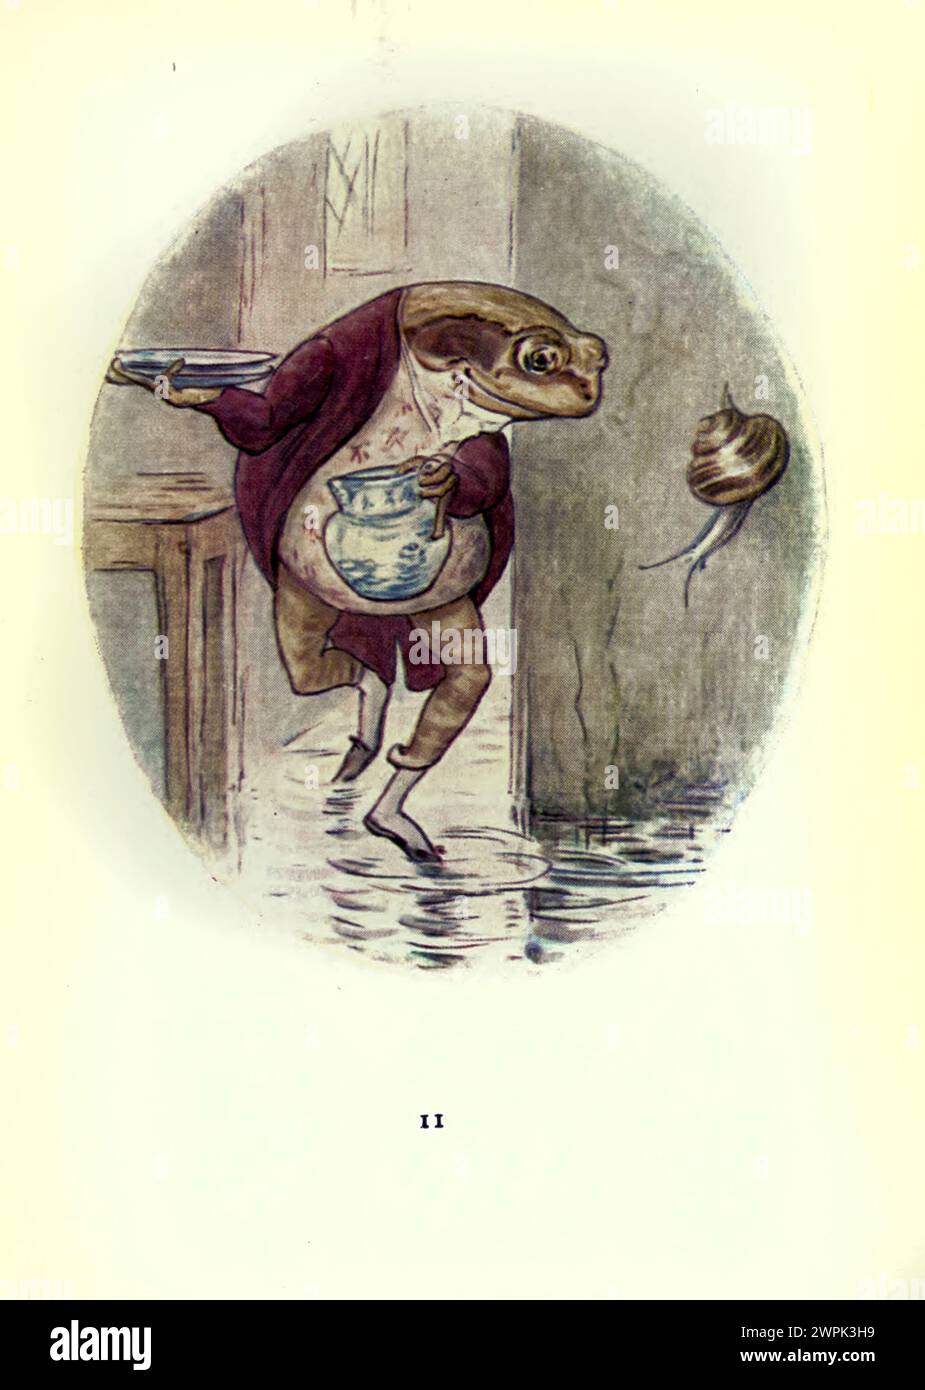 The tale of Mr. Jeremy Fisher by Beatrix Potter, The Tale of Mr. Jeremy Fisher is a children's book, written and illustrated by Beatrix Potter. It was published by Frederick Warne & Co. in July 1906. Jeremy Fisher is a frog that lives in a 'slippy-sloppy' house at the edge of a pond. During one rainy day, he collects worms for fishing and sets off across the pond on his lily-pad boat. He plans to invite his friends for dinner if he catches more than five minnows. He encounters all sorts of setbacks to his goal, and escapes a large trout who tries to swallow him. He swims for shore, decides he Stock Photo